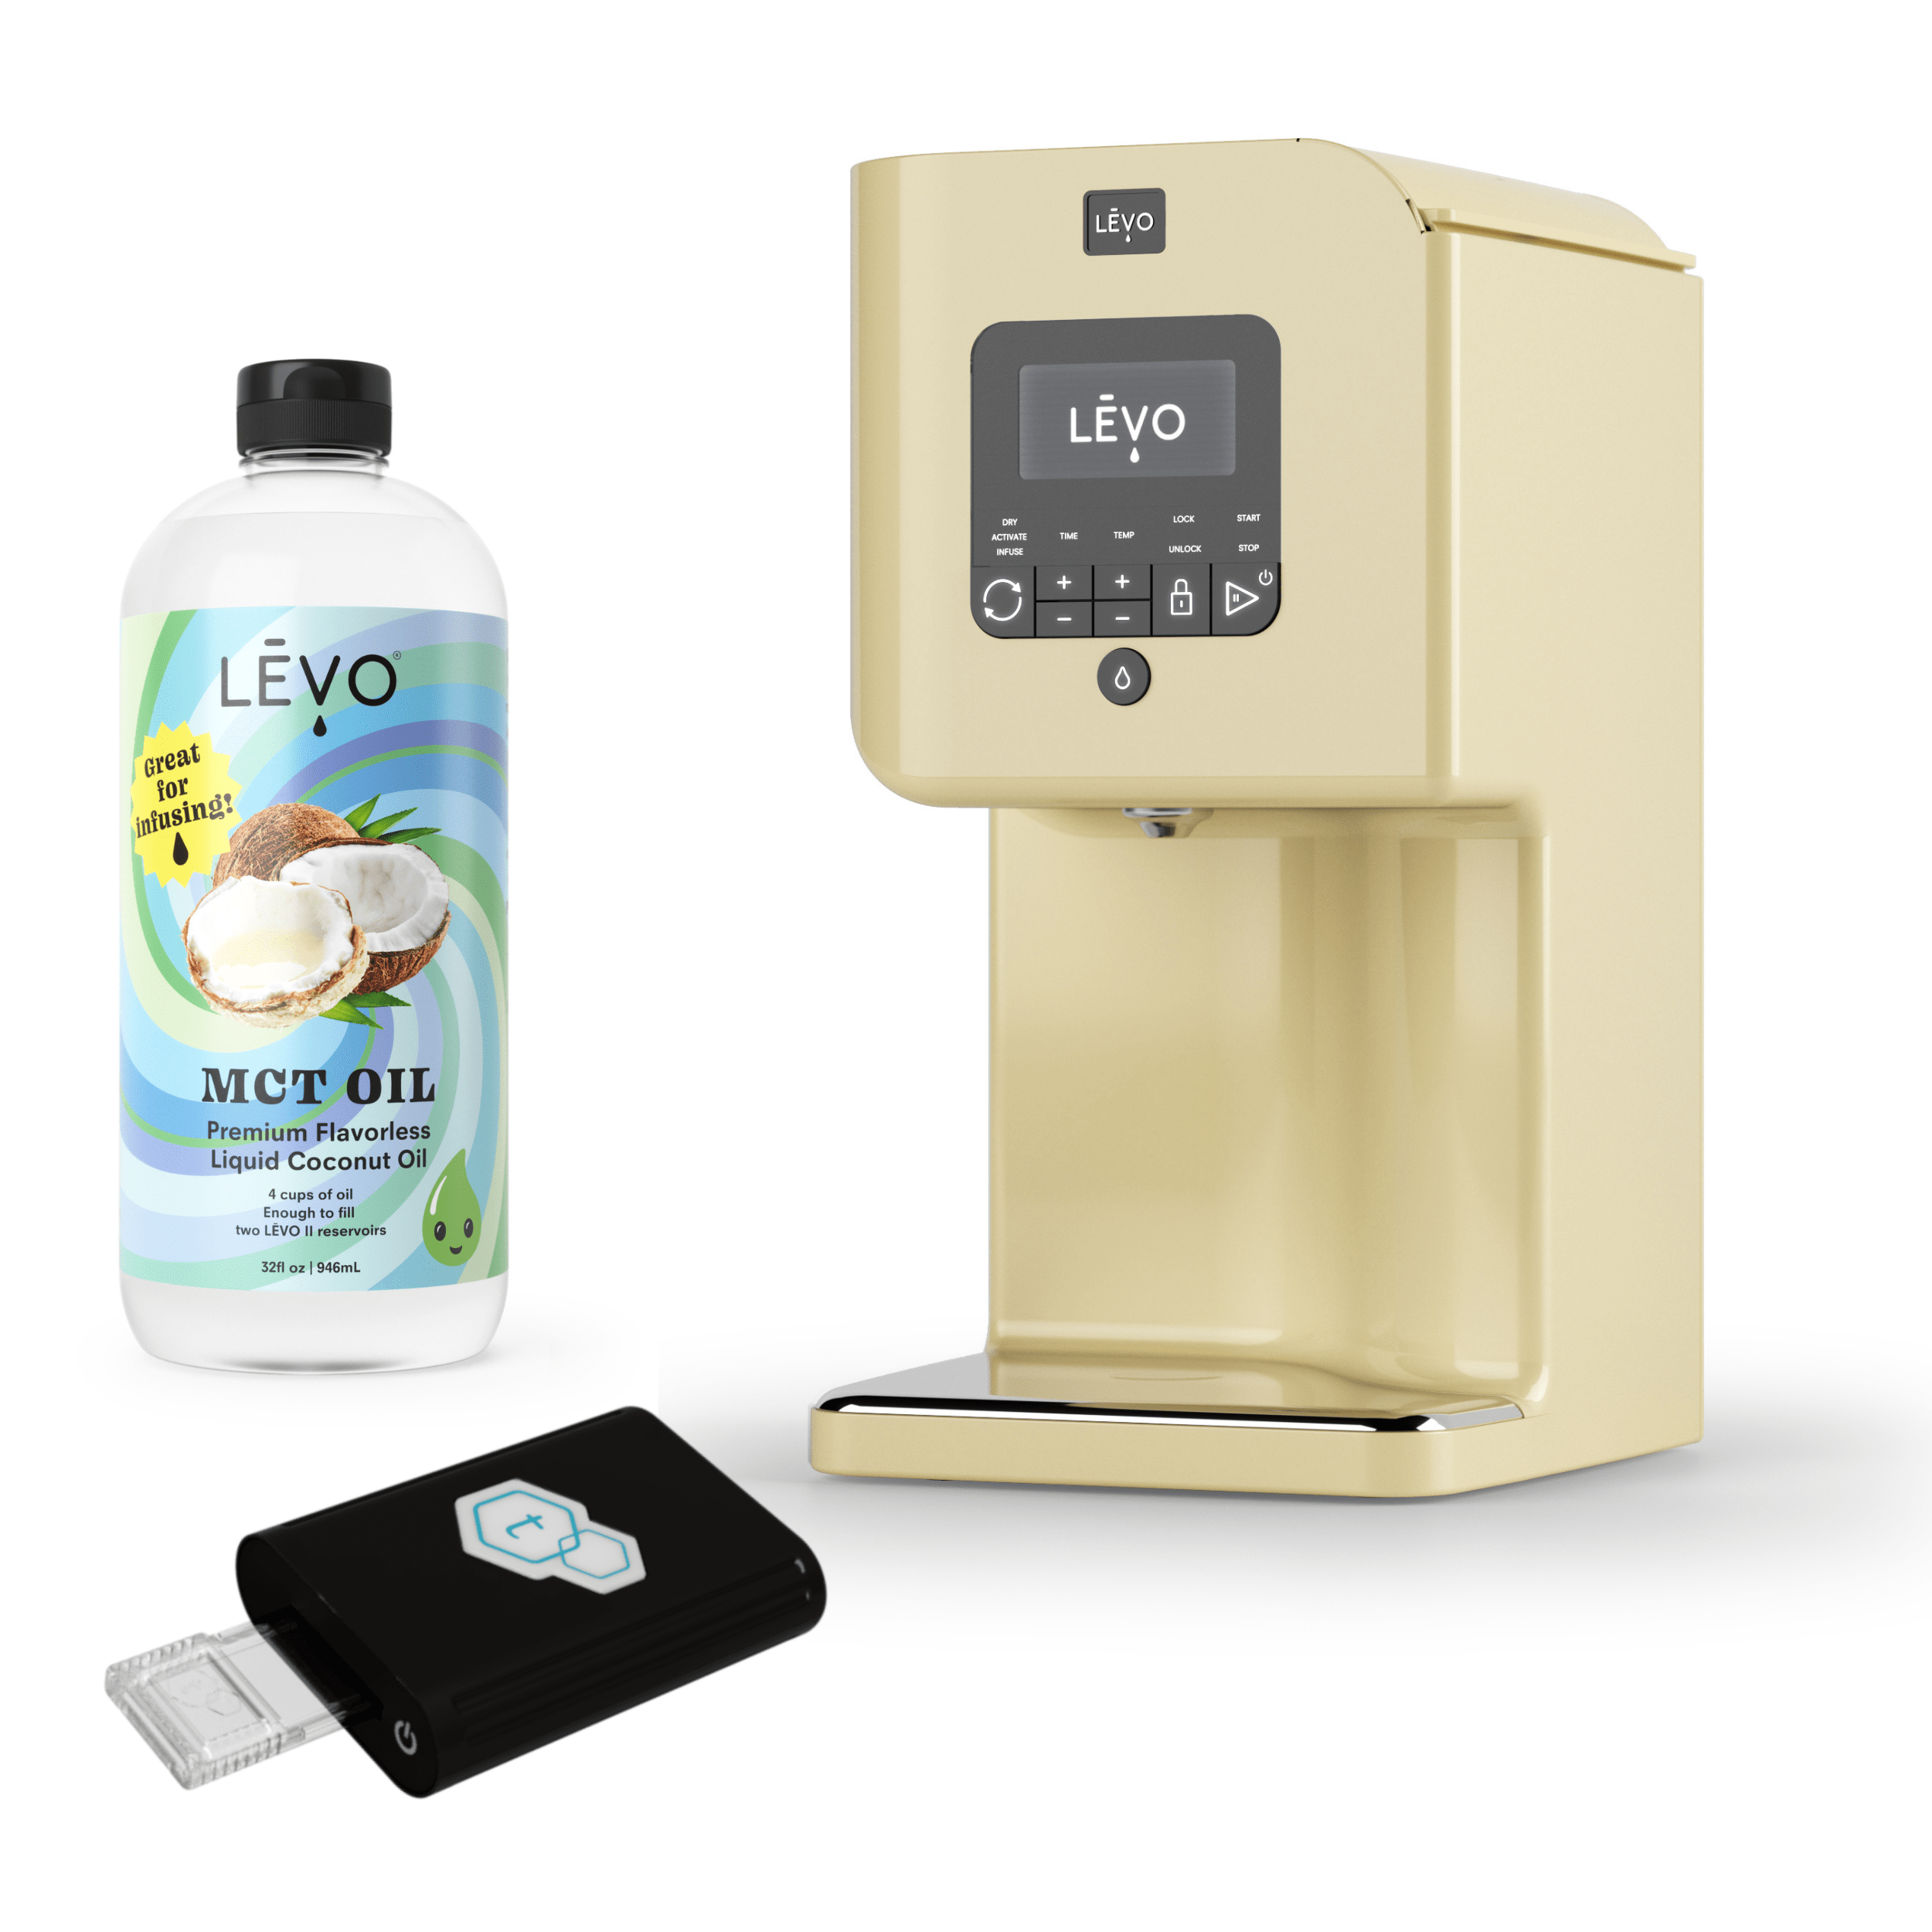 LEVO II oil infuser with tCheck potency testing device and LEVO MCT Oil. LĒVO C x tCheck Potency Tester Bundle: Infuse and test with precision.